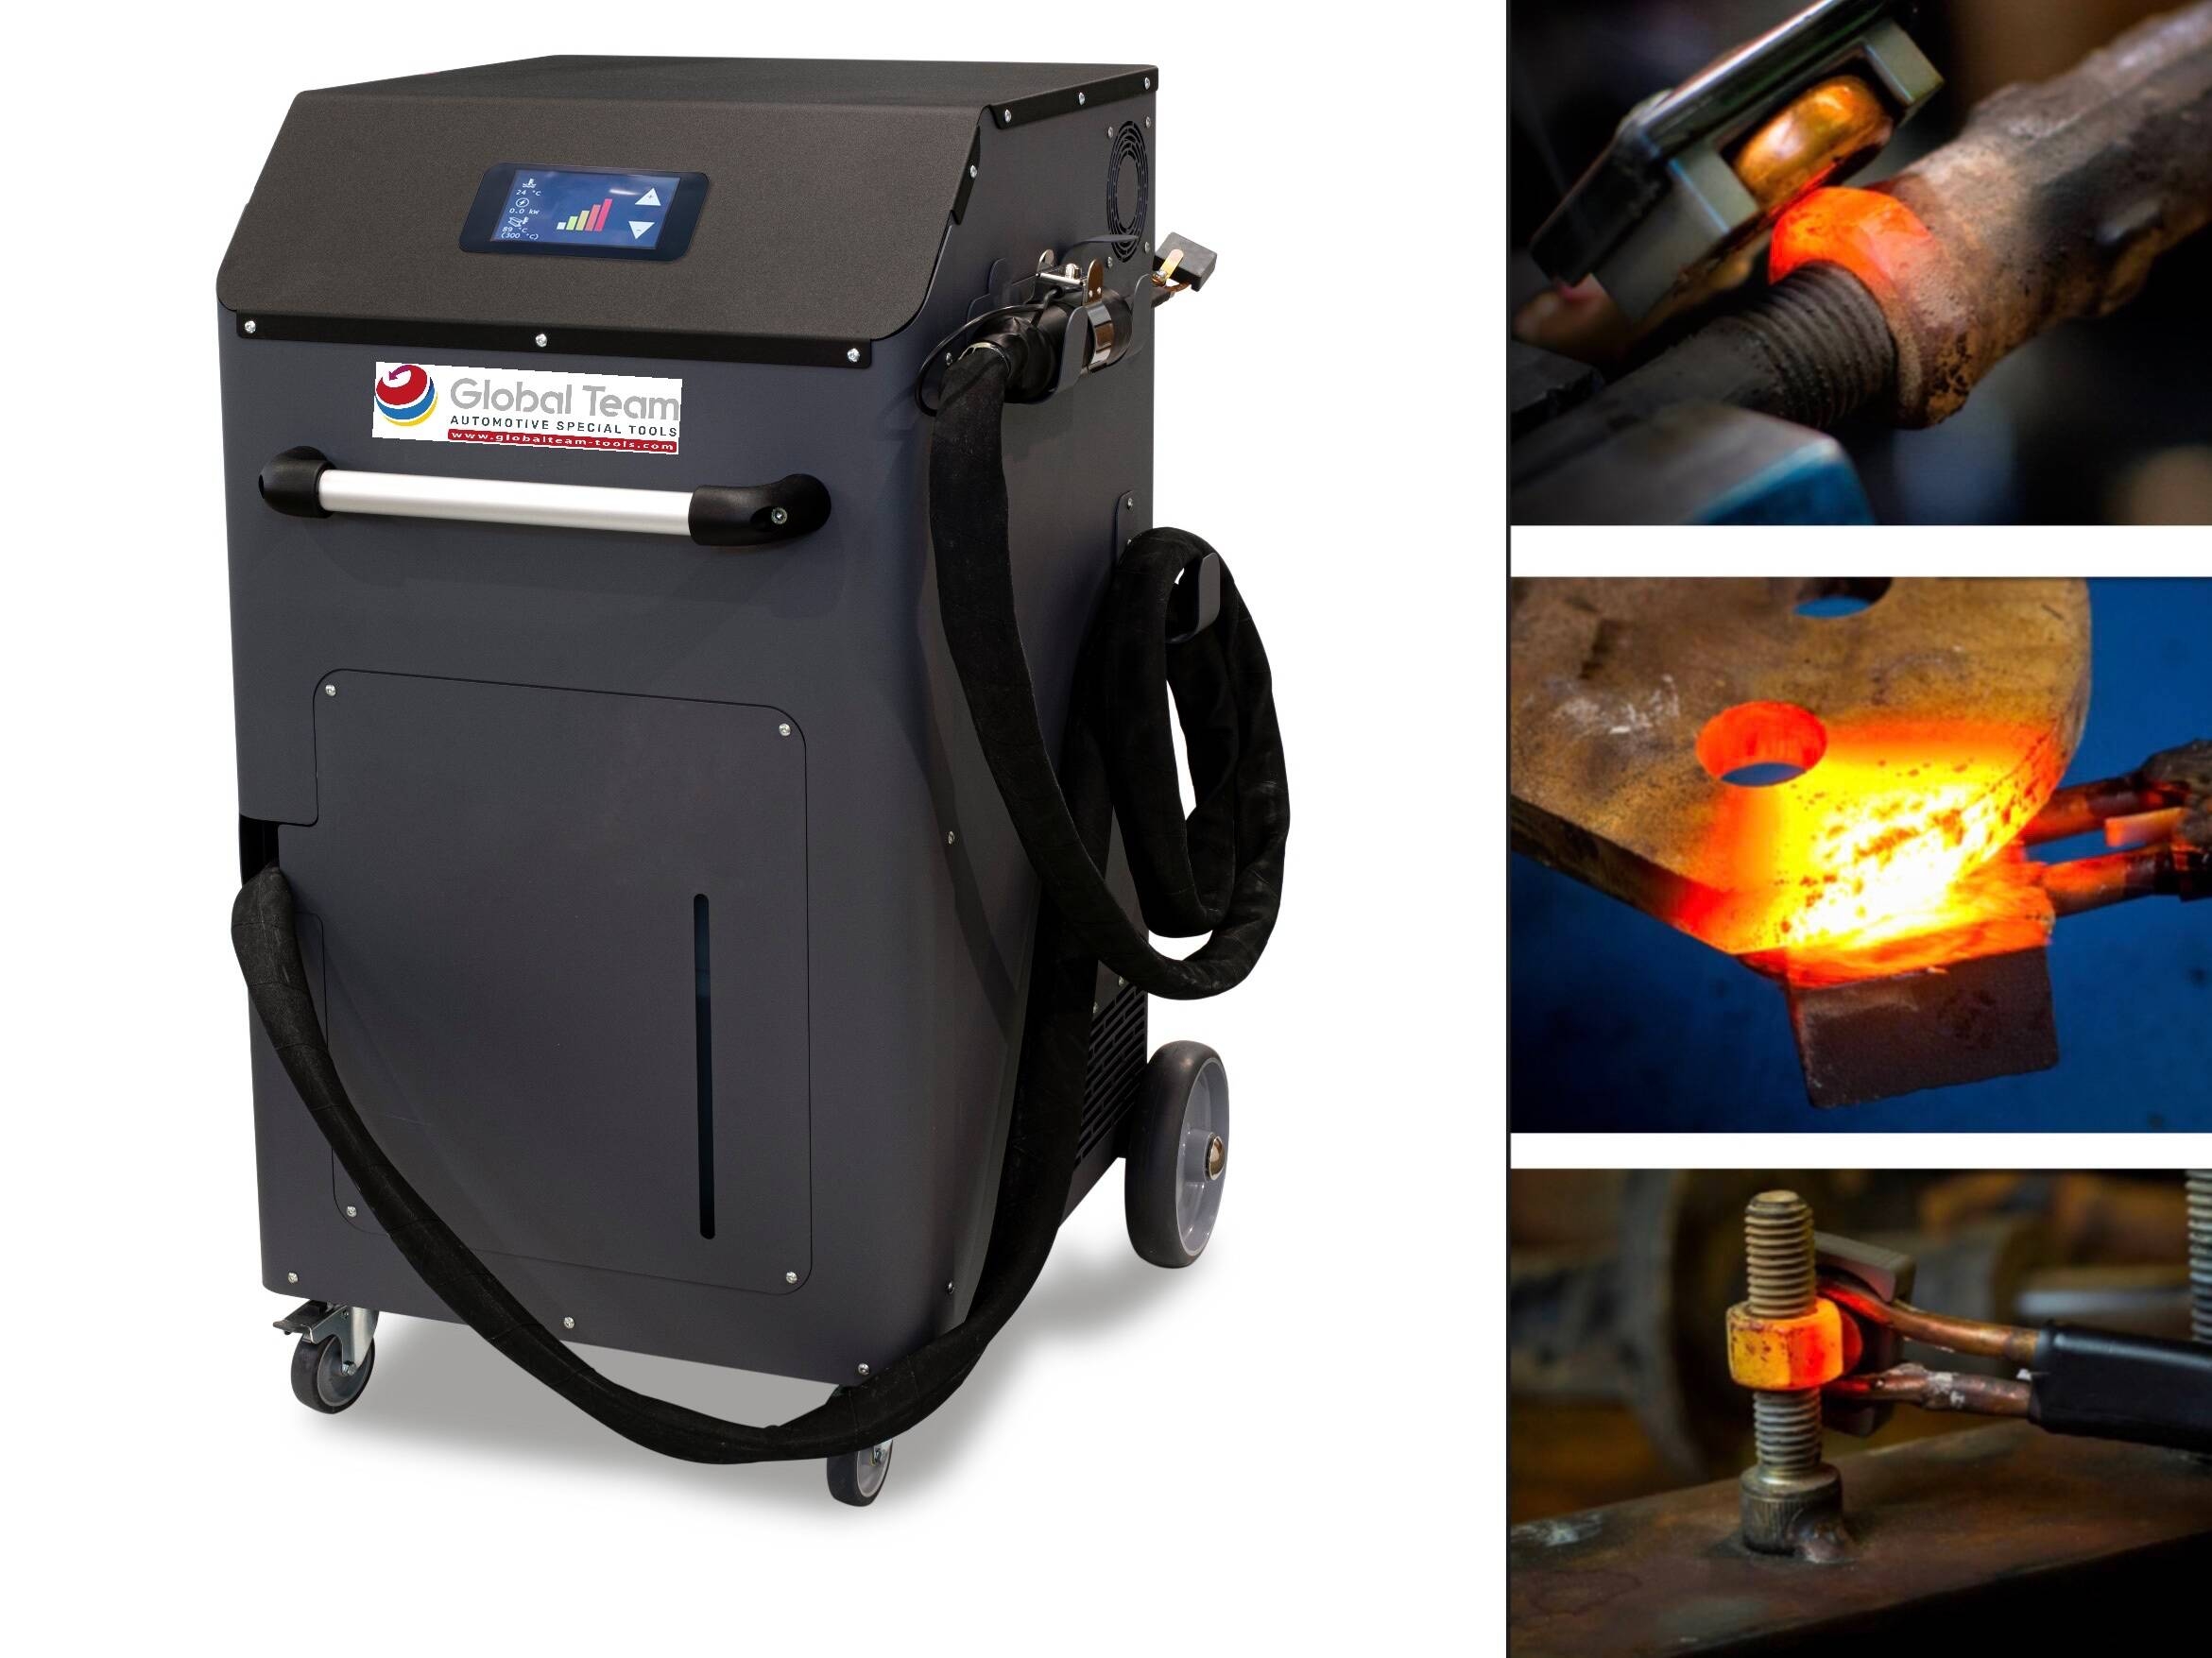 Global Team produced induction heater brand by Euromachines high quality/price ratio